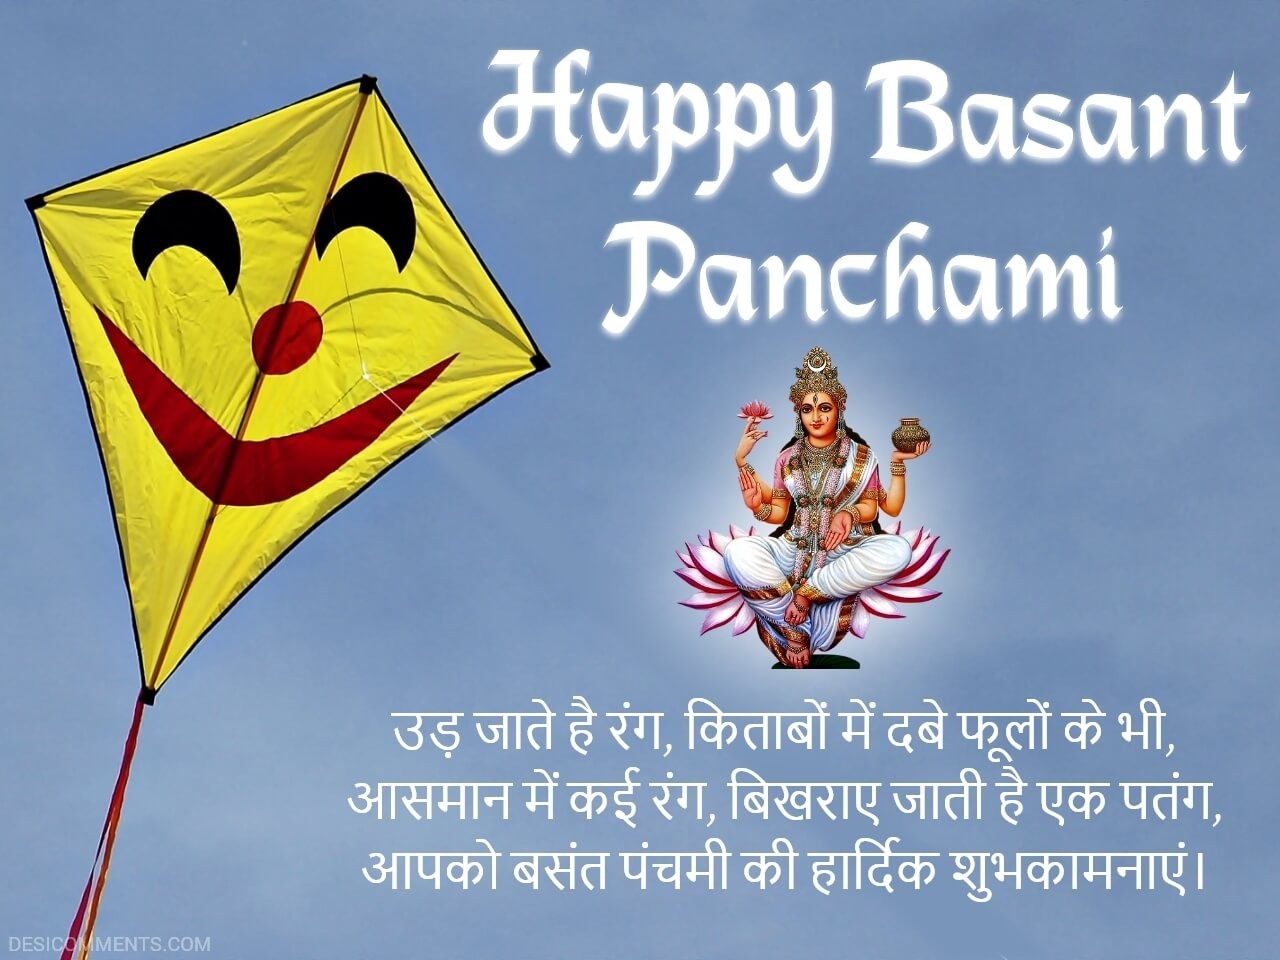 110+ Basant Panchami Images, Pictures, Photos - Page 2